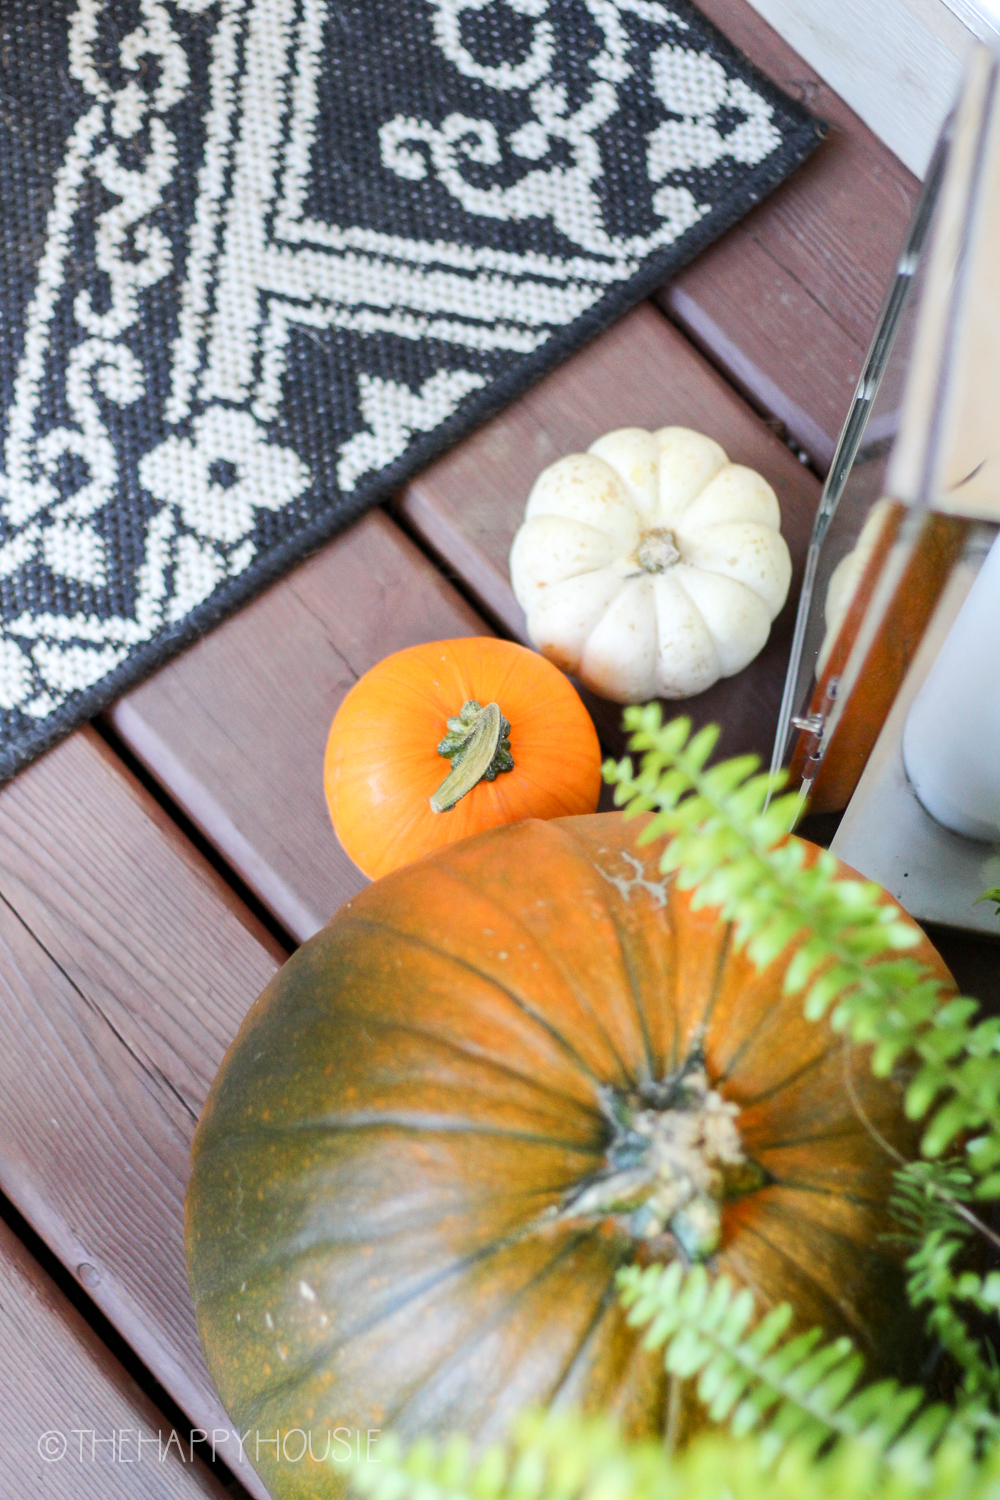 There is a large pumpkins beside the smaller ones on the porch with a black and white mat beside them.